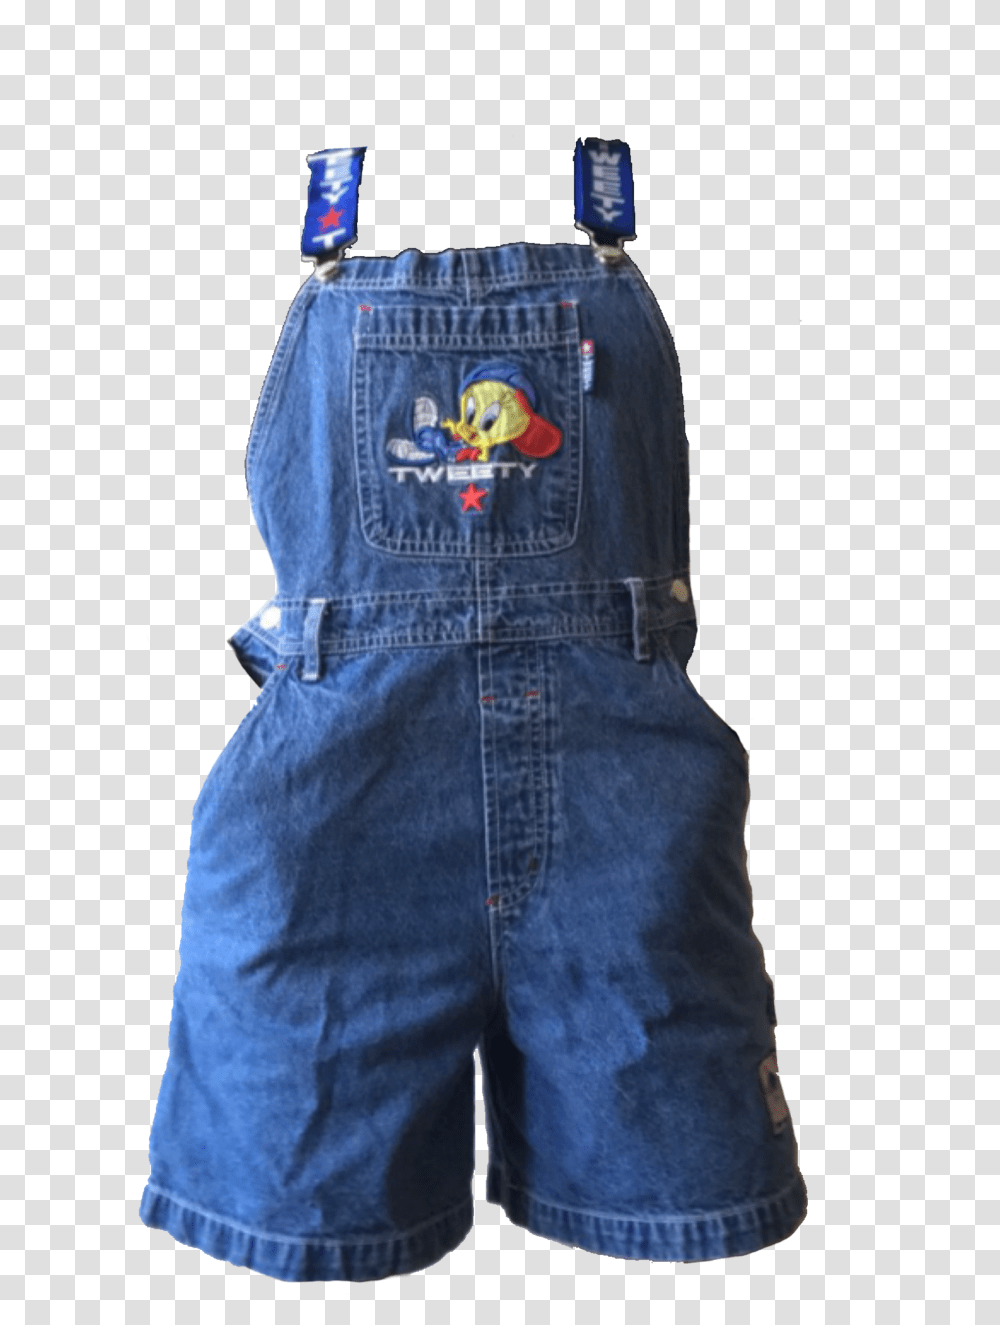 Pngs And Ig Pocket, Pants, Apparel, Jeans Transparent Png